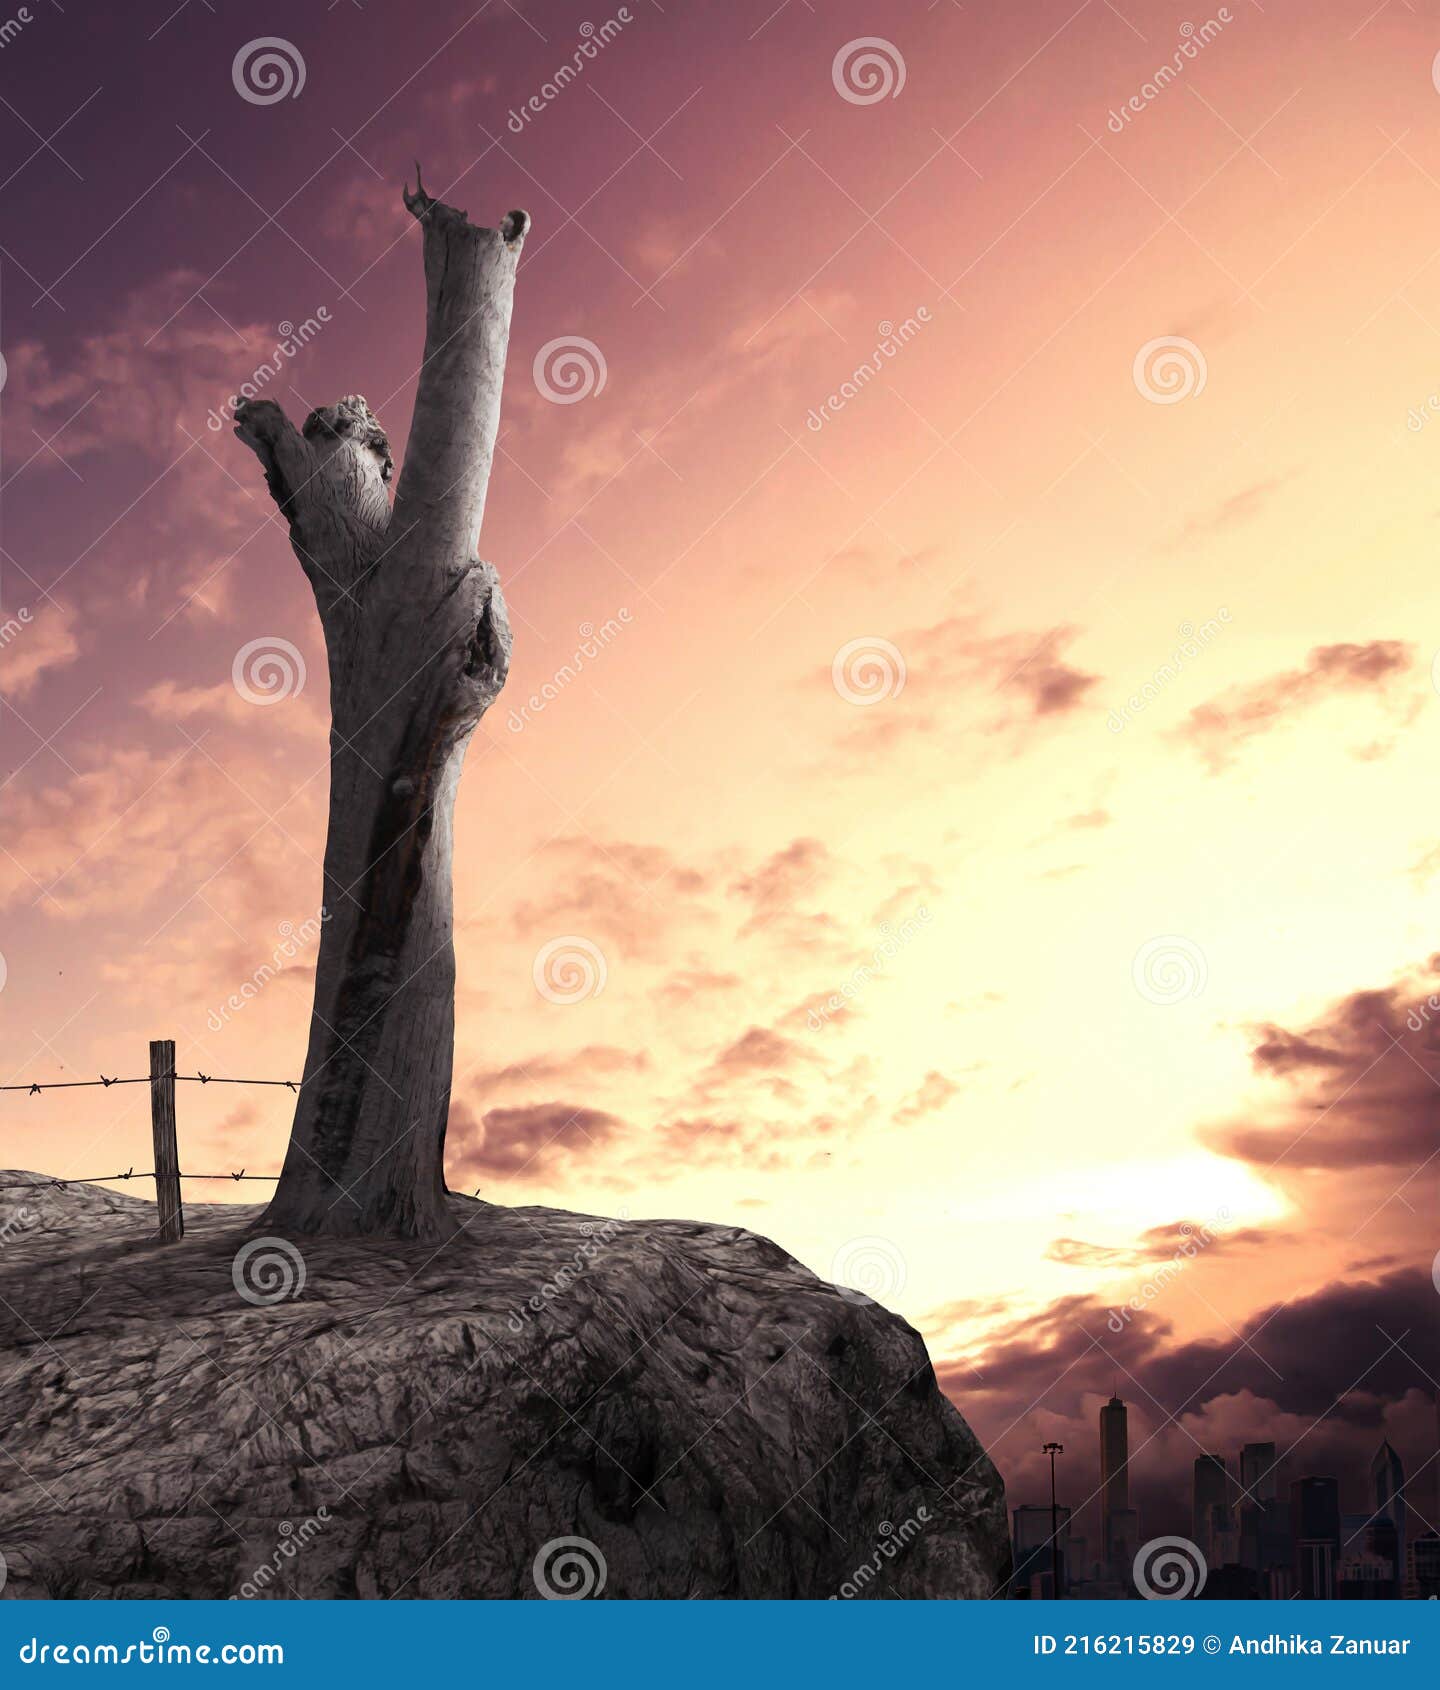 On Top of a Cliff at Sunset and Dead Tree Stock Image - Image of culture,  fairytale: 216215829